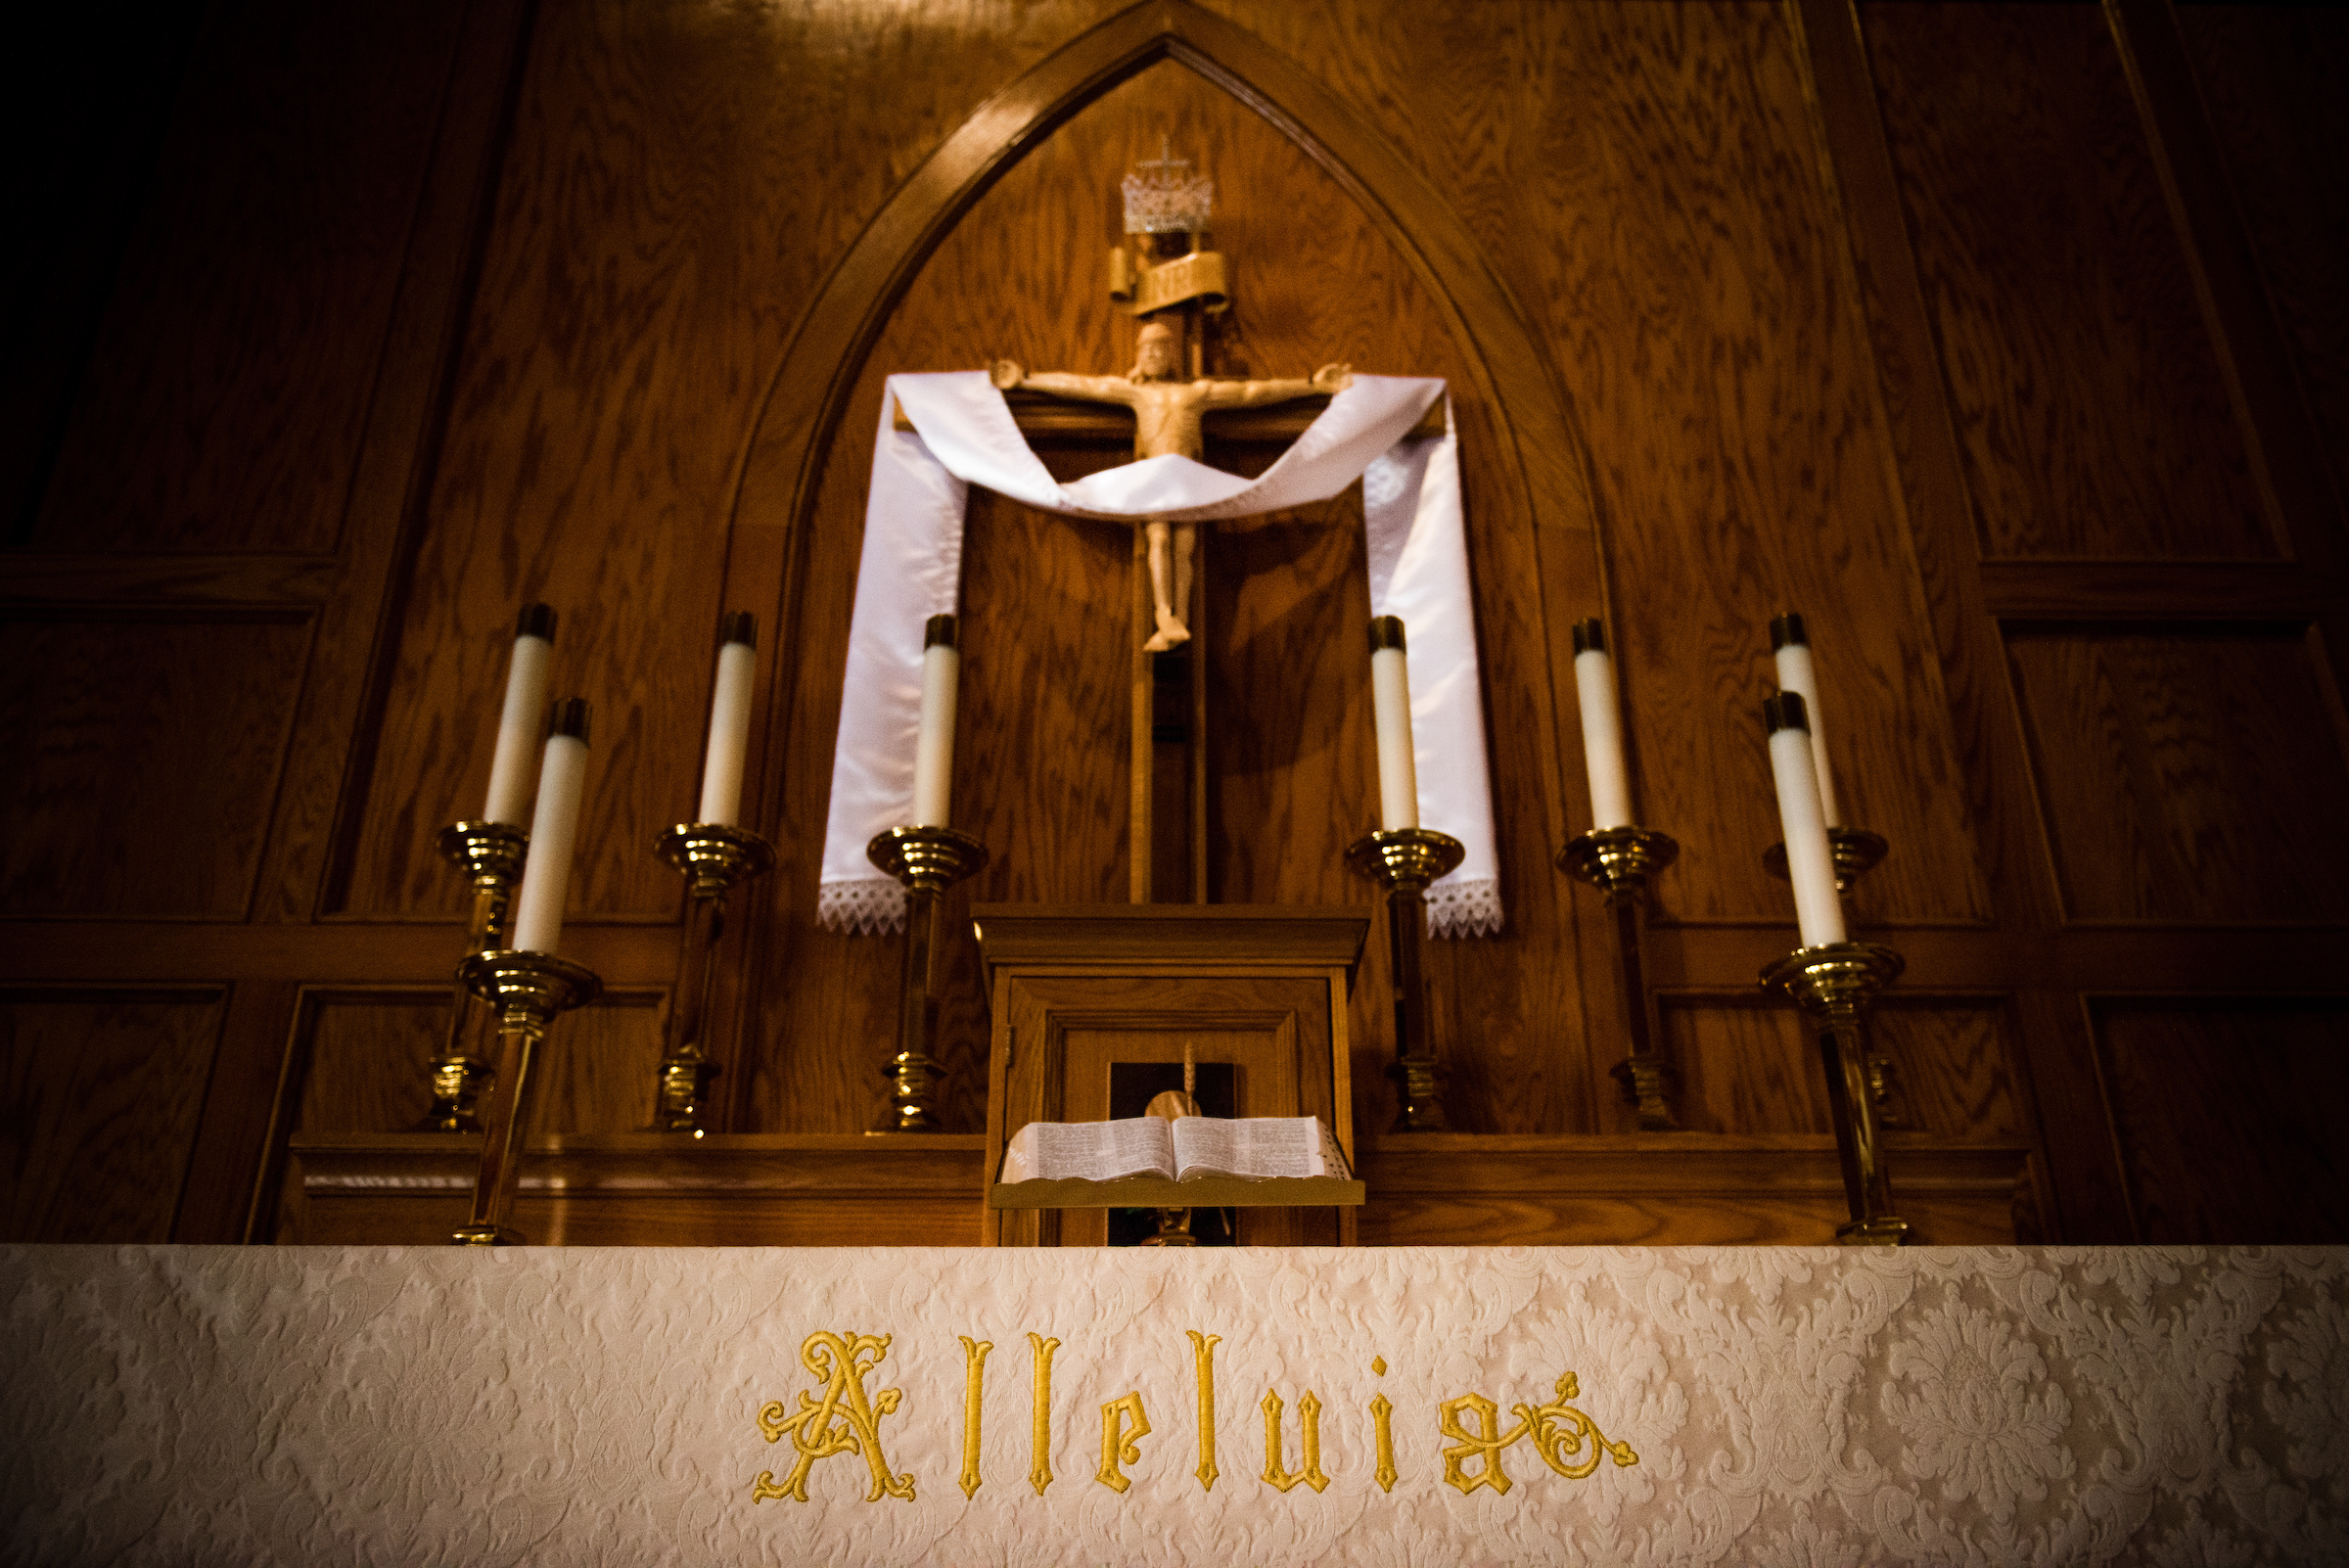 The altar of St. John's Lutheran Church, Conover, N.C, on Friday, April 21, 2017. LCMS Communications/Erik M. Lunsford